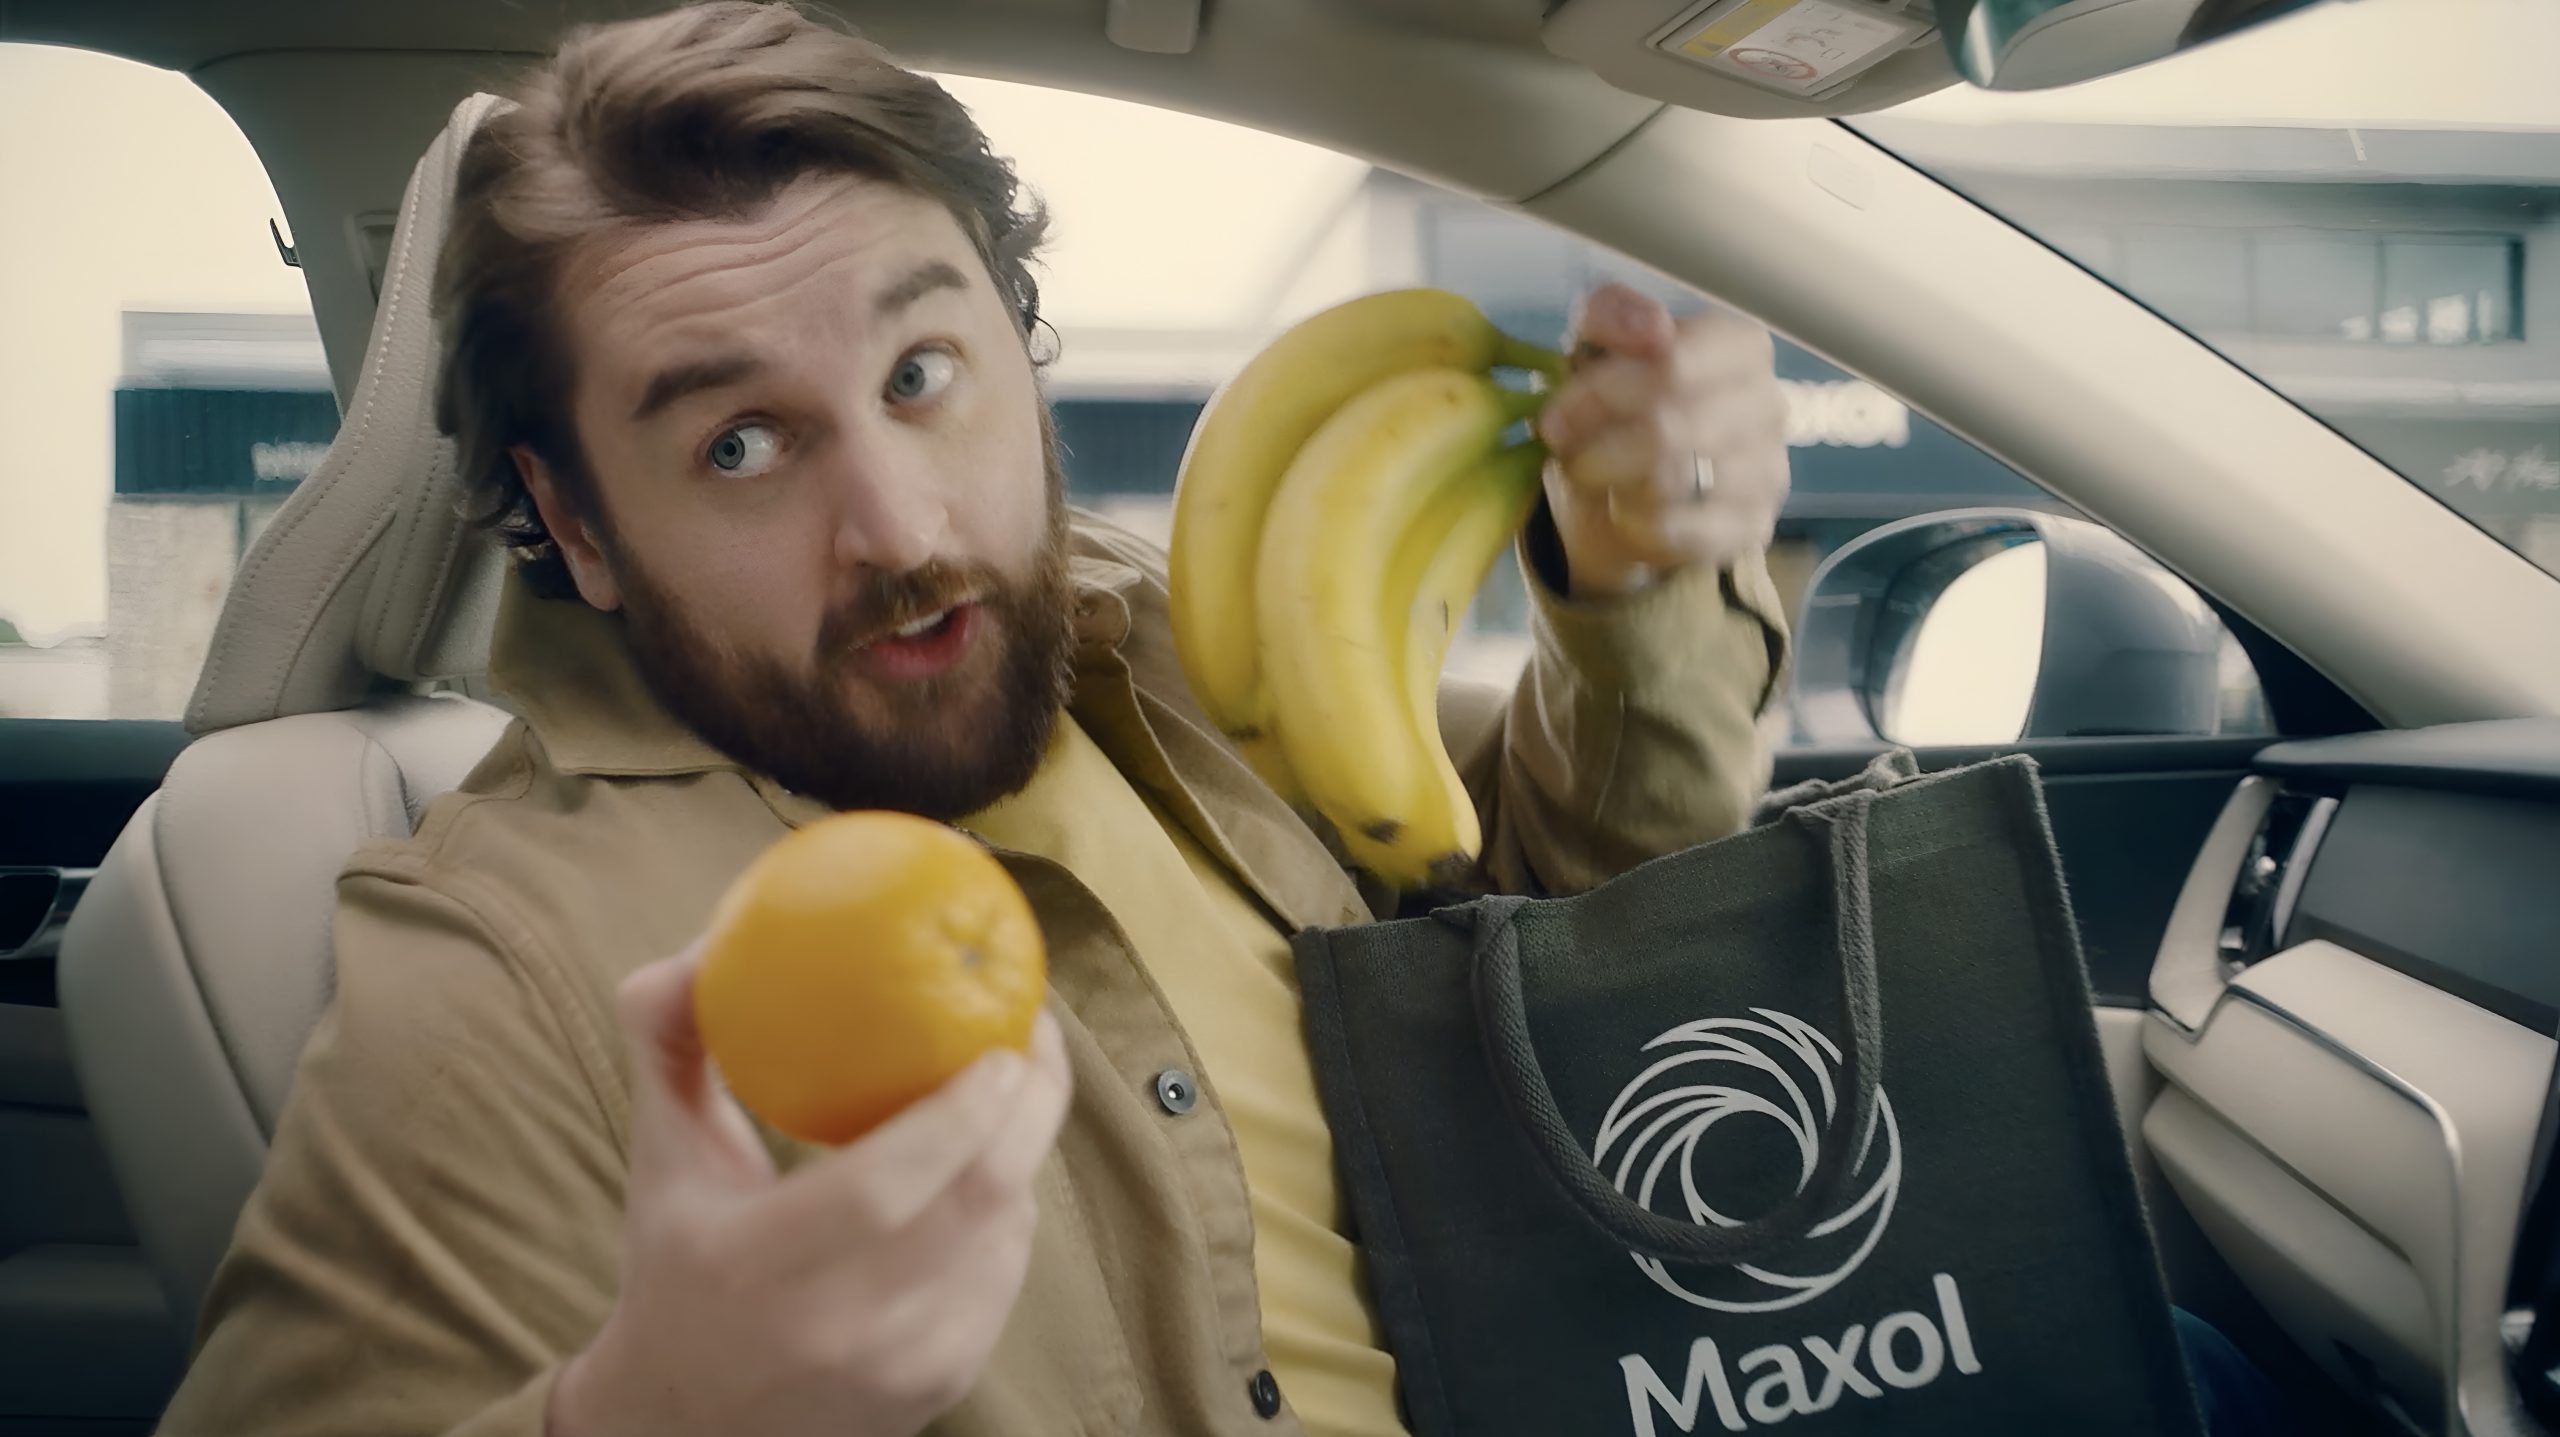 Maxol offers Bags More in its first TV campaign in over 7 years